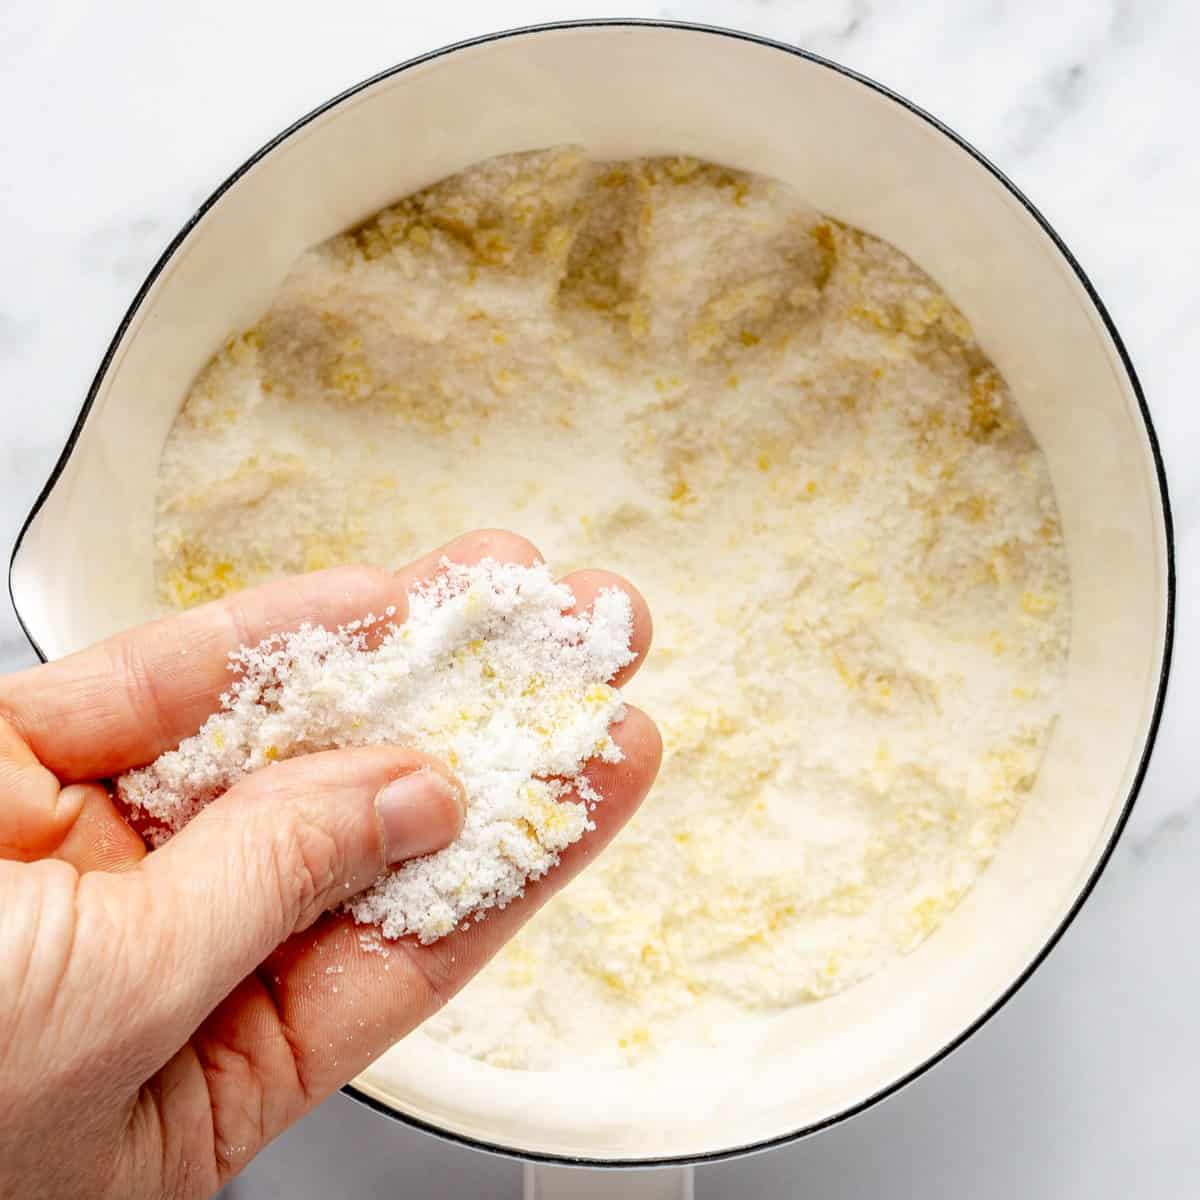 Sugar and lemon zest in a bowl with fingers massaging them together